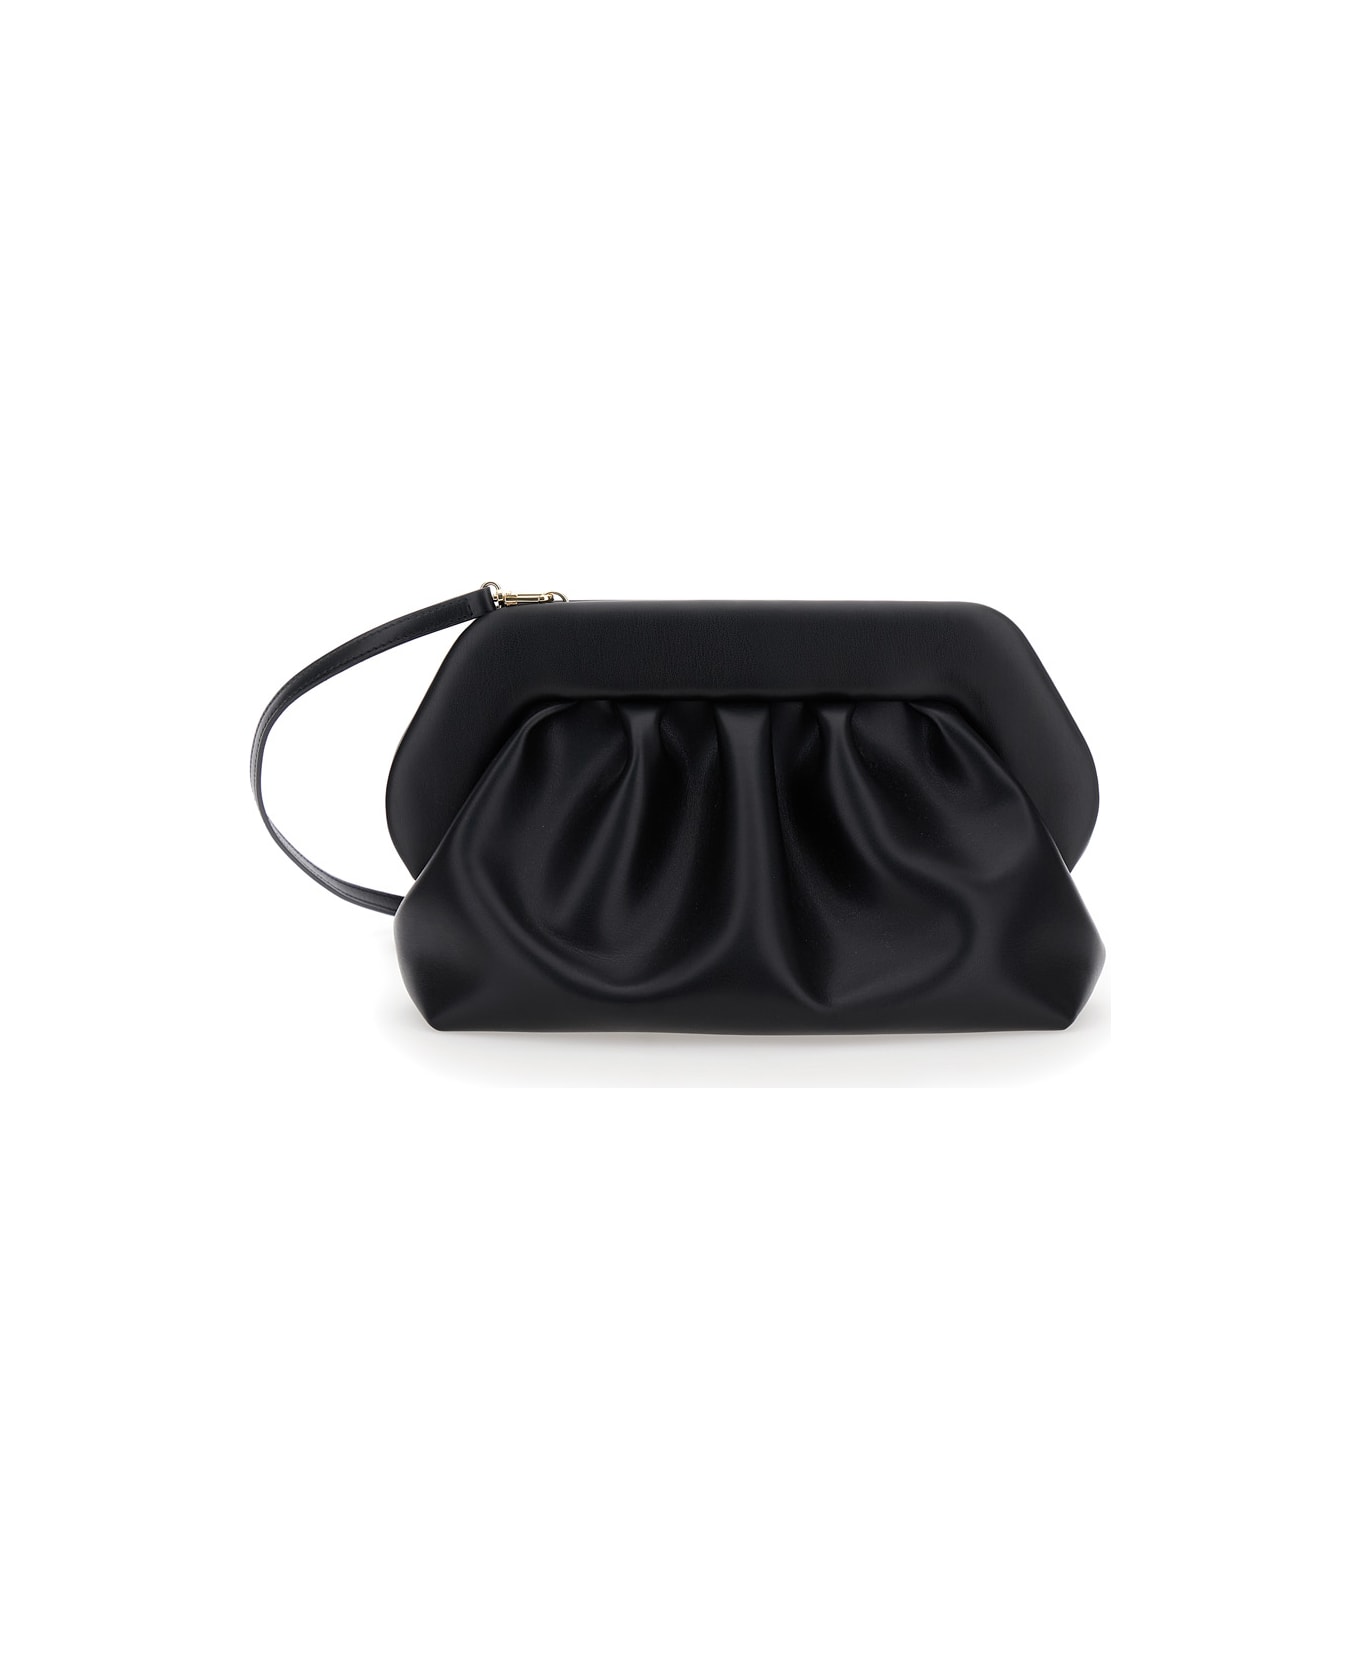 THEMOIRè Black Clutch Bag With Magnetic Closure In Eco Leather Woman - Black クラッチバッグ